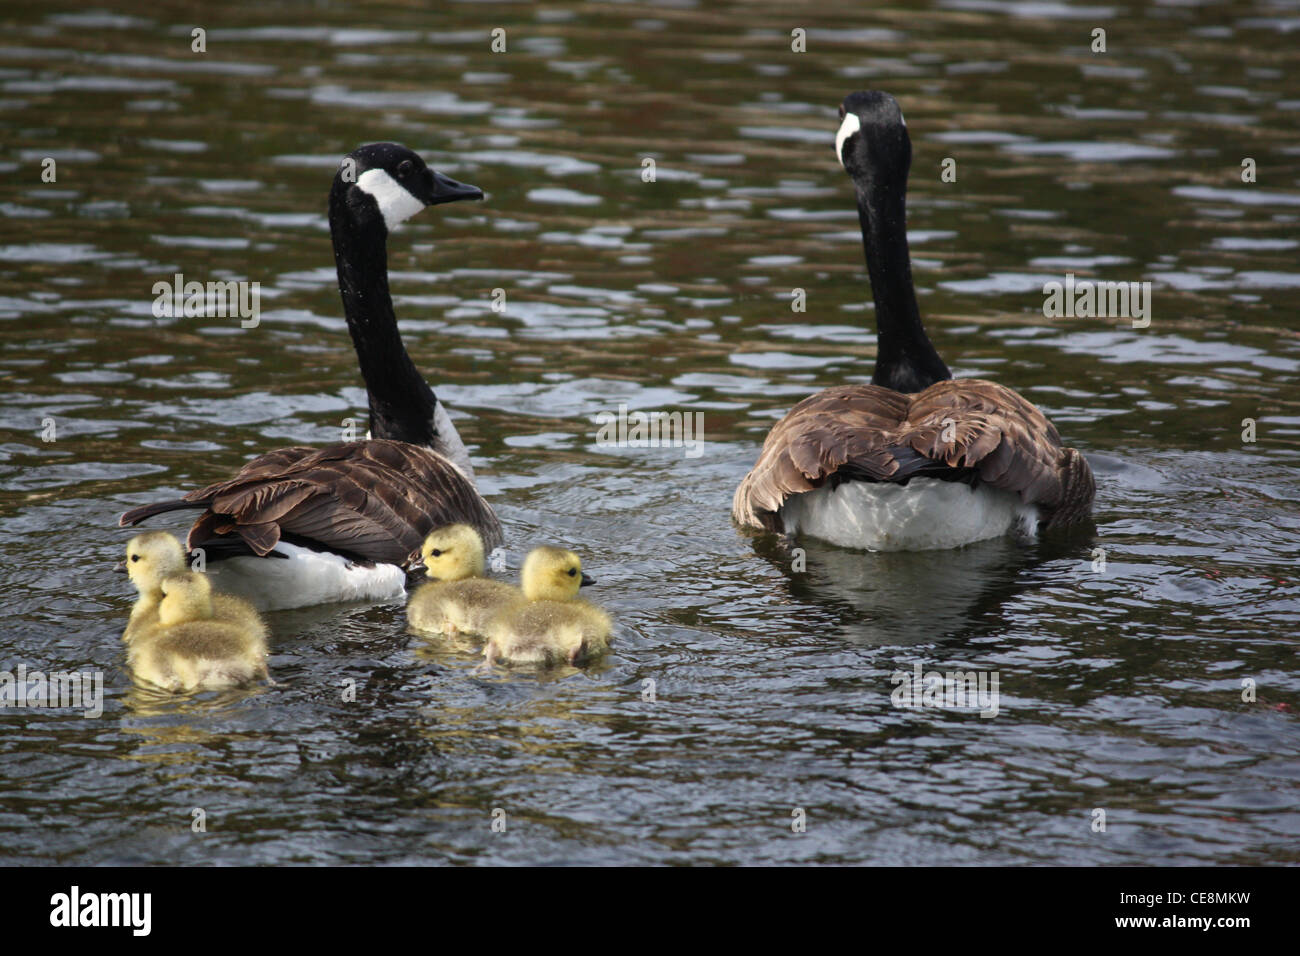 A close up view of a Canadian geese family swimming away. There are four yellow babies (goslings)  swimming  behind the female. Stock Photo